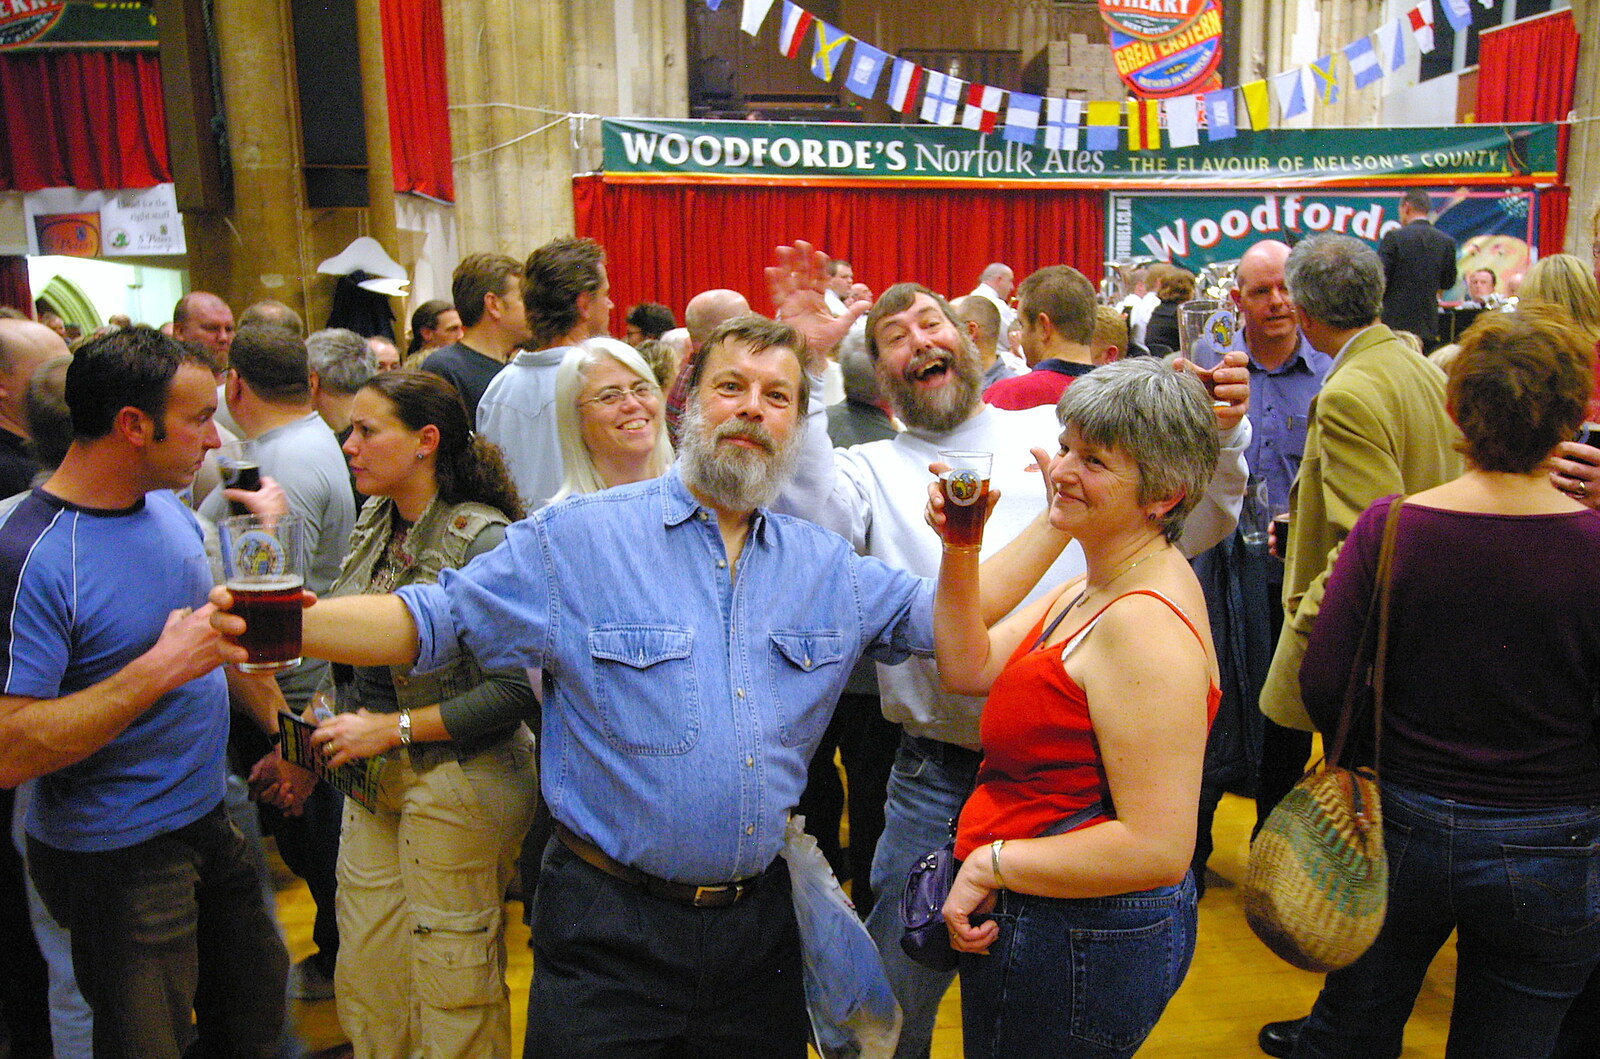 The 28th Norwich Beer Festival, St. Andrew's Hall, Norwich - 26th October 2005: Carol, Benny, Gerry and Gloria